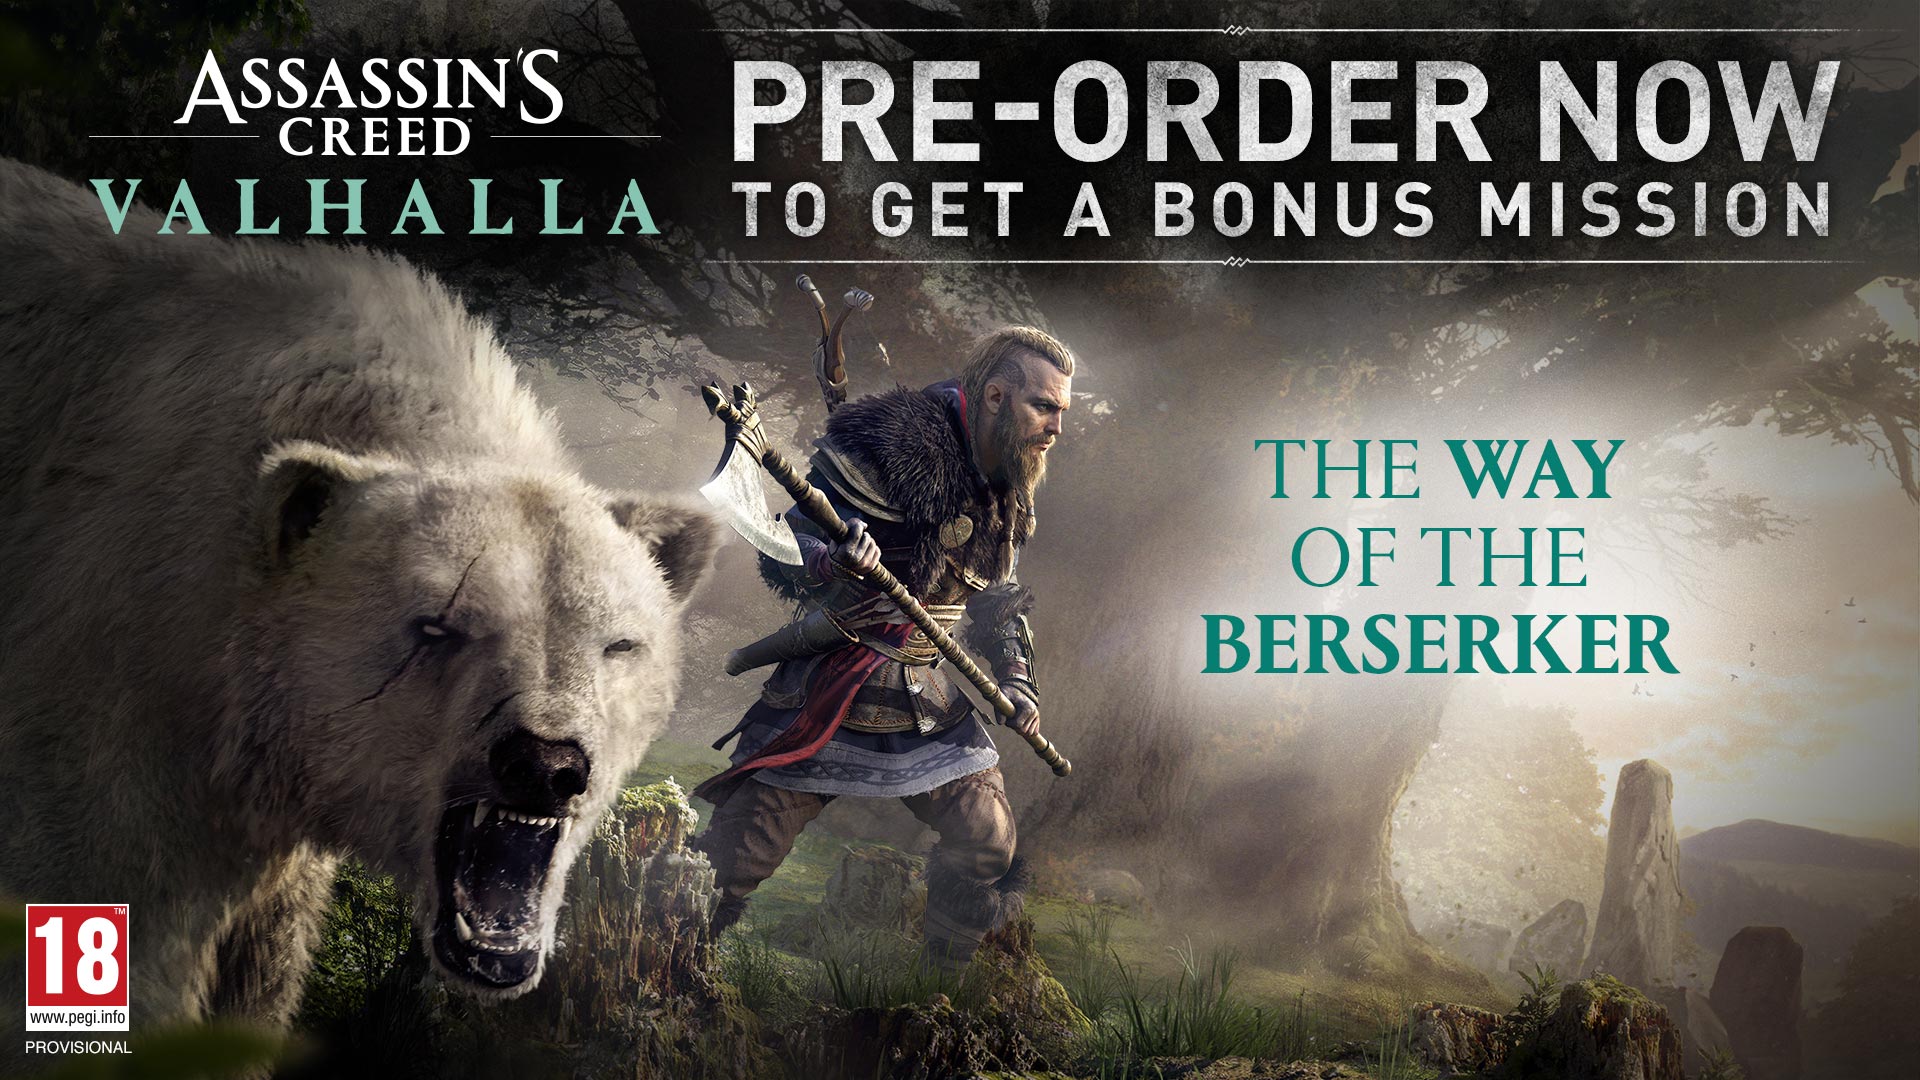 Redeeming Your Assassin S Creed Valhalla Pre Order Code Ubisoft